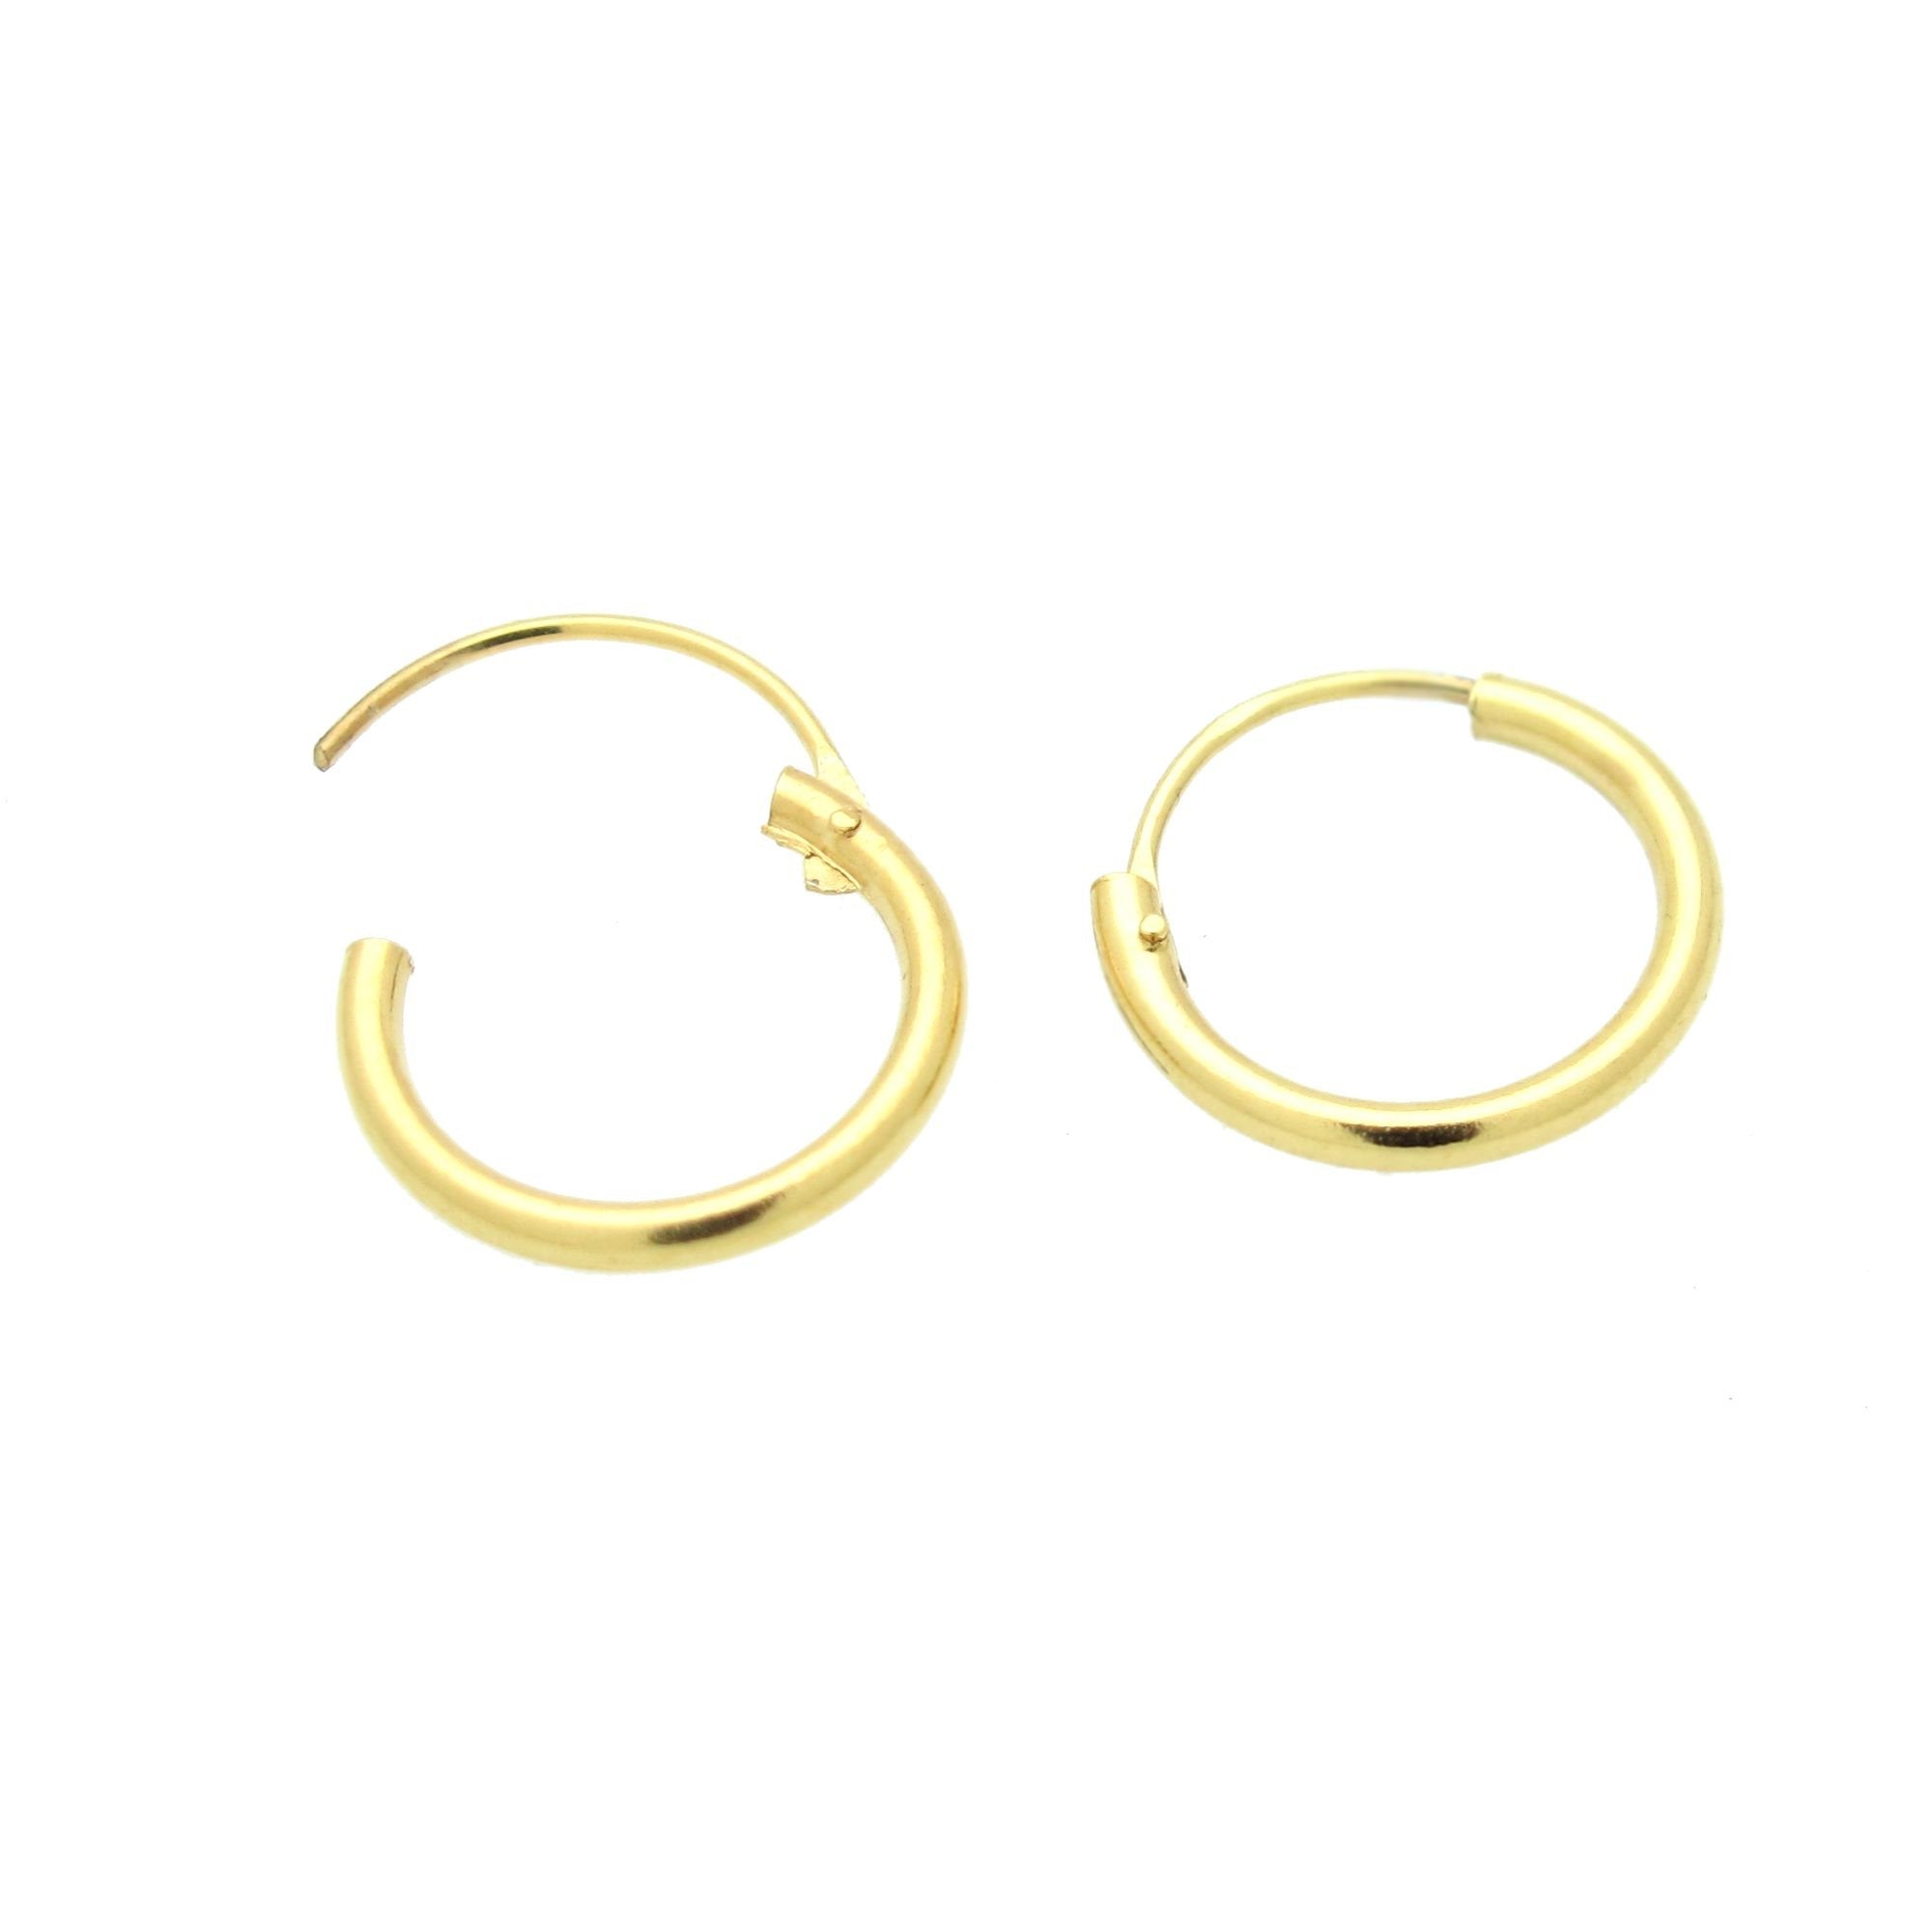 CANDERE - A KALYAN JEWELLERS COMPANY 22K (916) BIS Hallmark Yellow Gold  Bali Earring for Men with Hoop wire closure.. : Amazon.in: Fashion